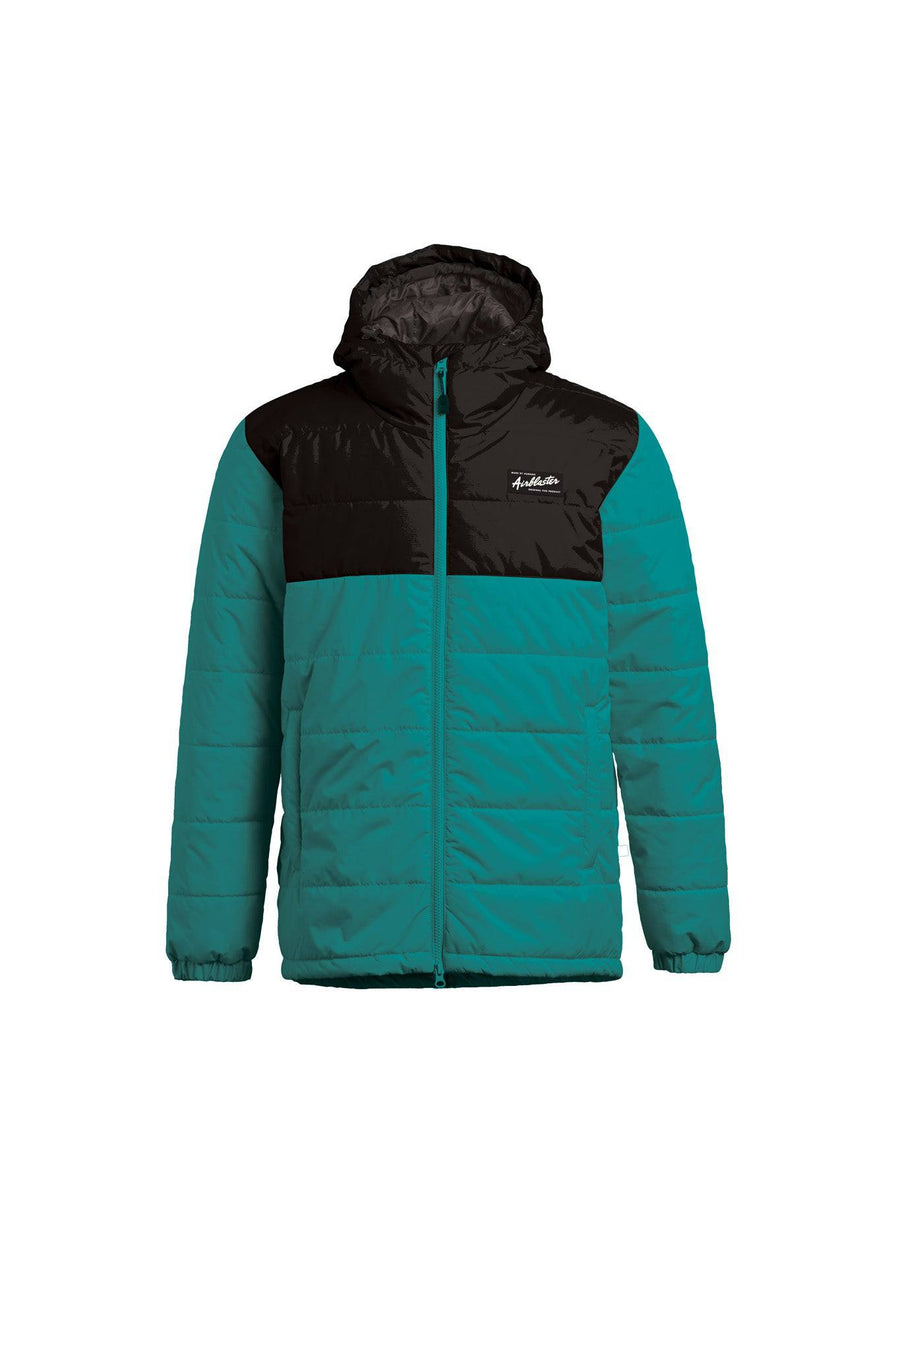 Airblaster Puffin Full Zip Jacket in Teal 2023